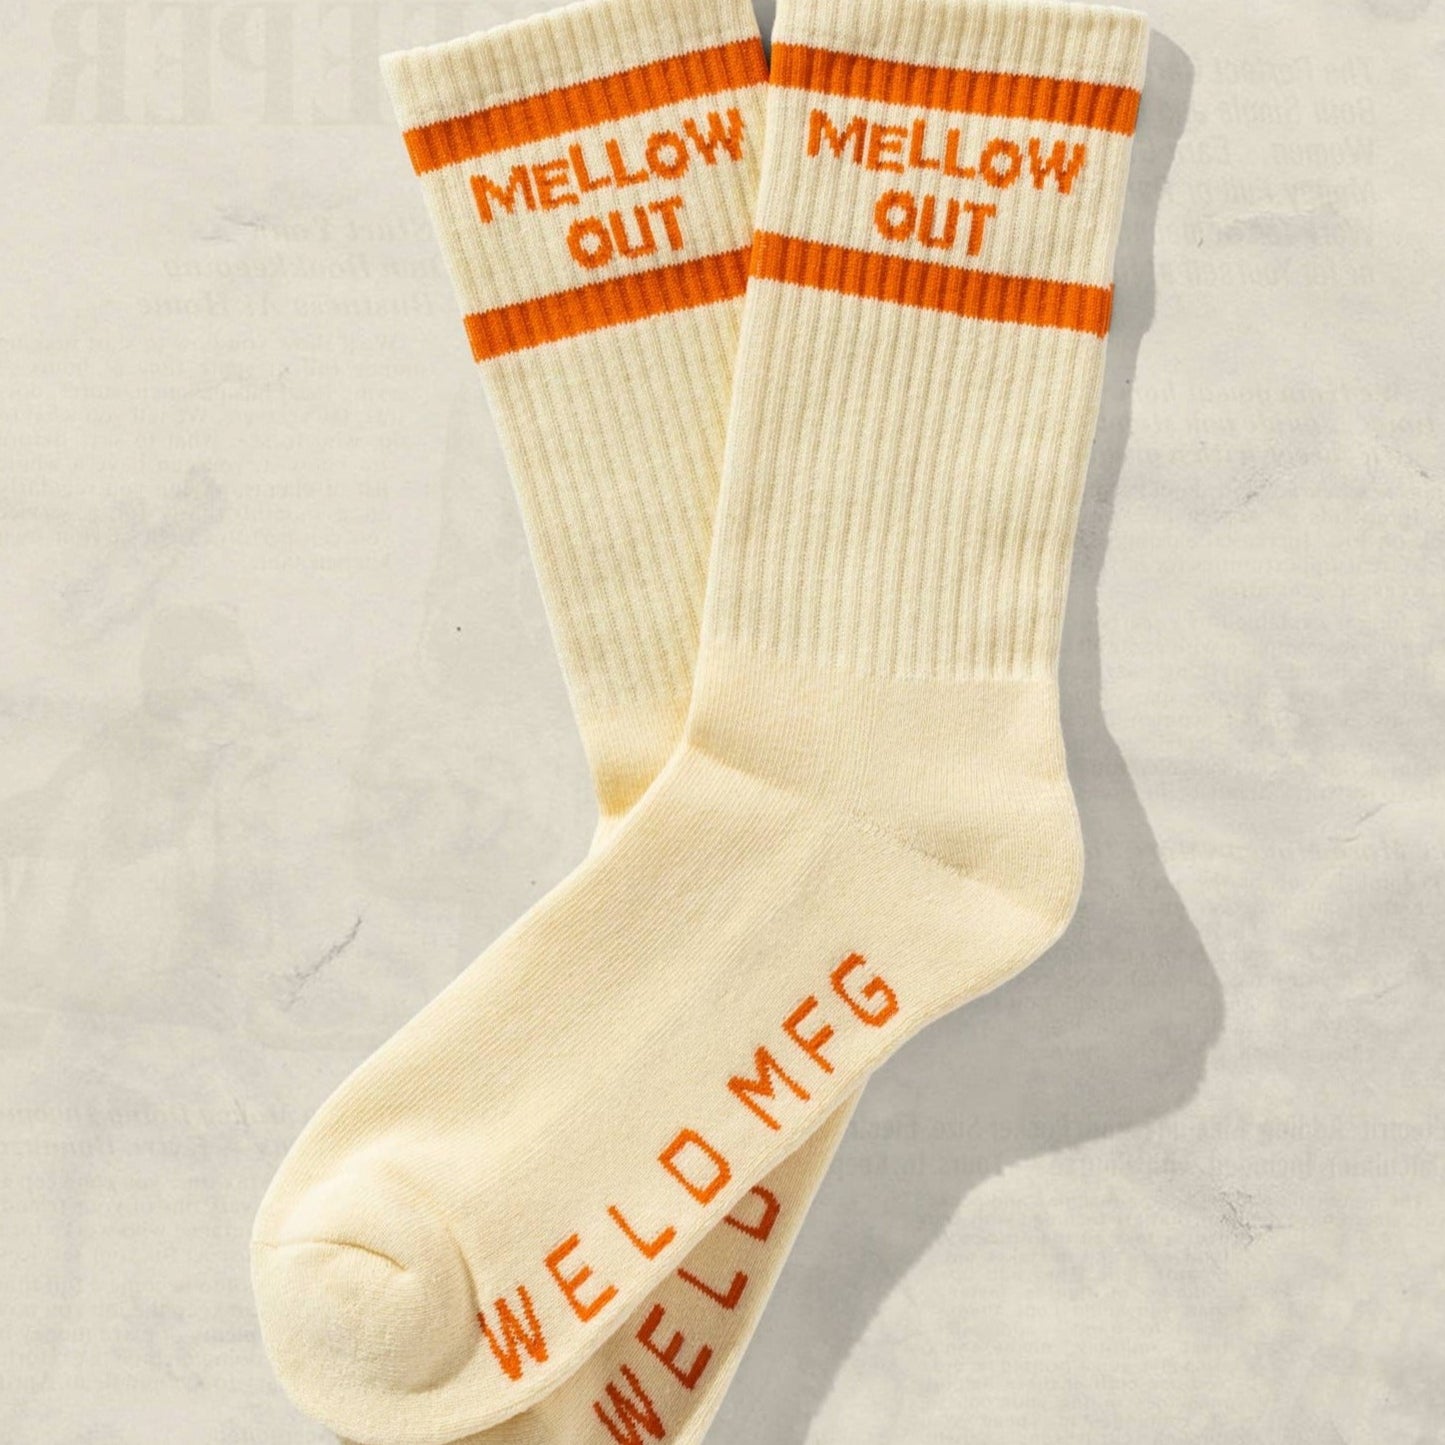 “Mellow Out” Crew Socks